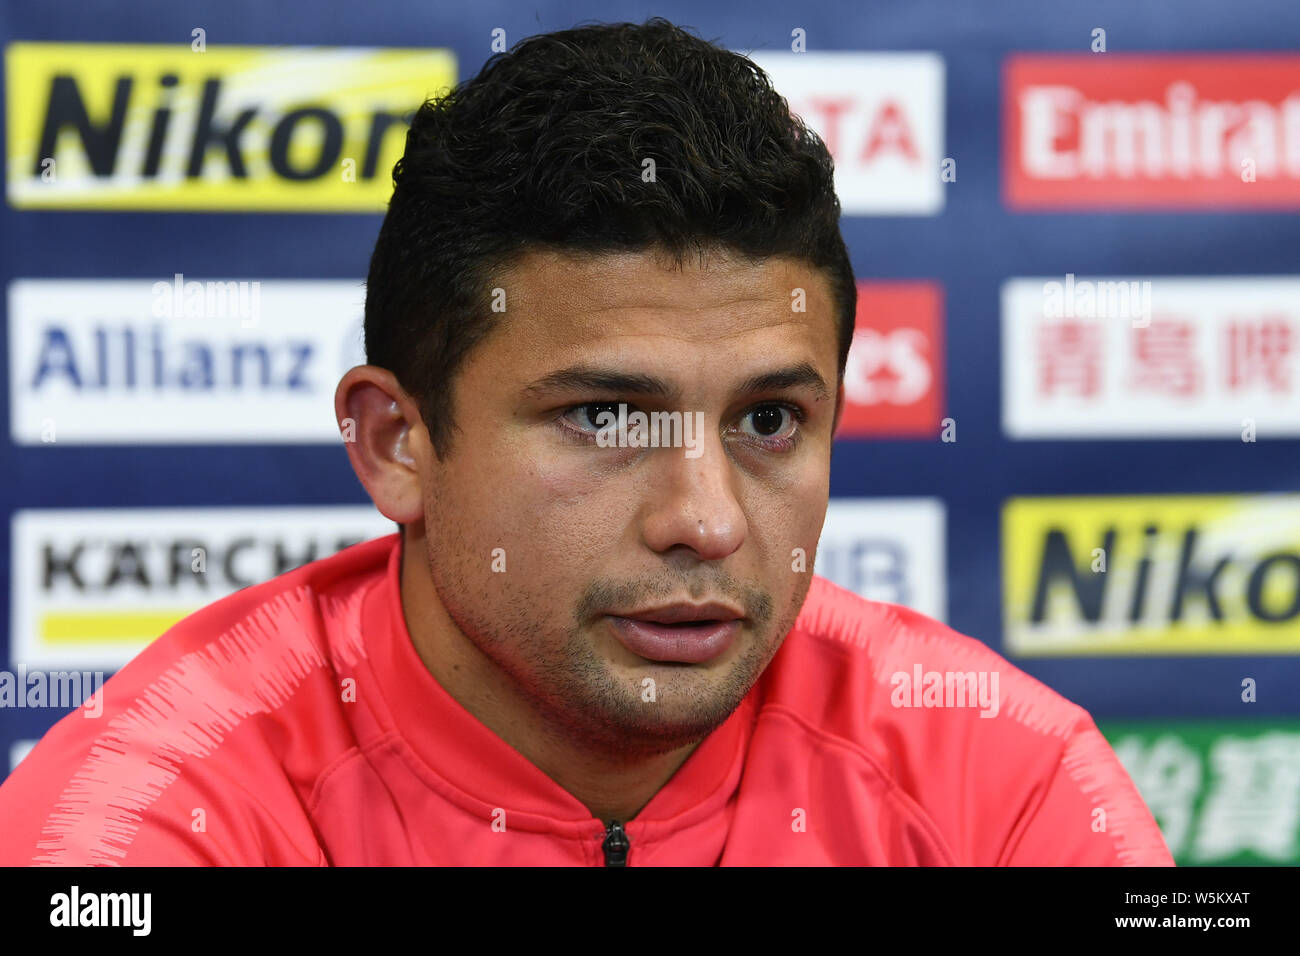 Brazilian football player Elkeson de Oliveira Cardoso, or simply Elkeson,  of China's Shanghai SIPG F.C. attends a press conference after the group H  m Stock Photo - Alamy